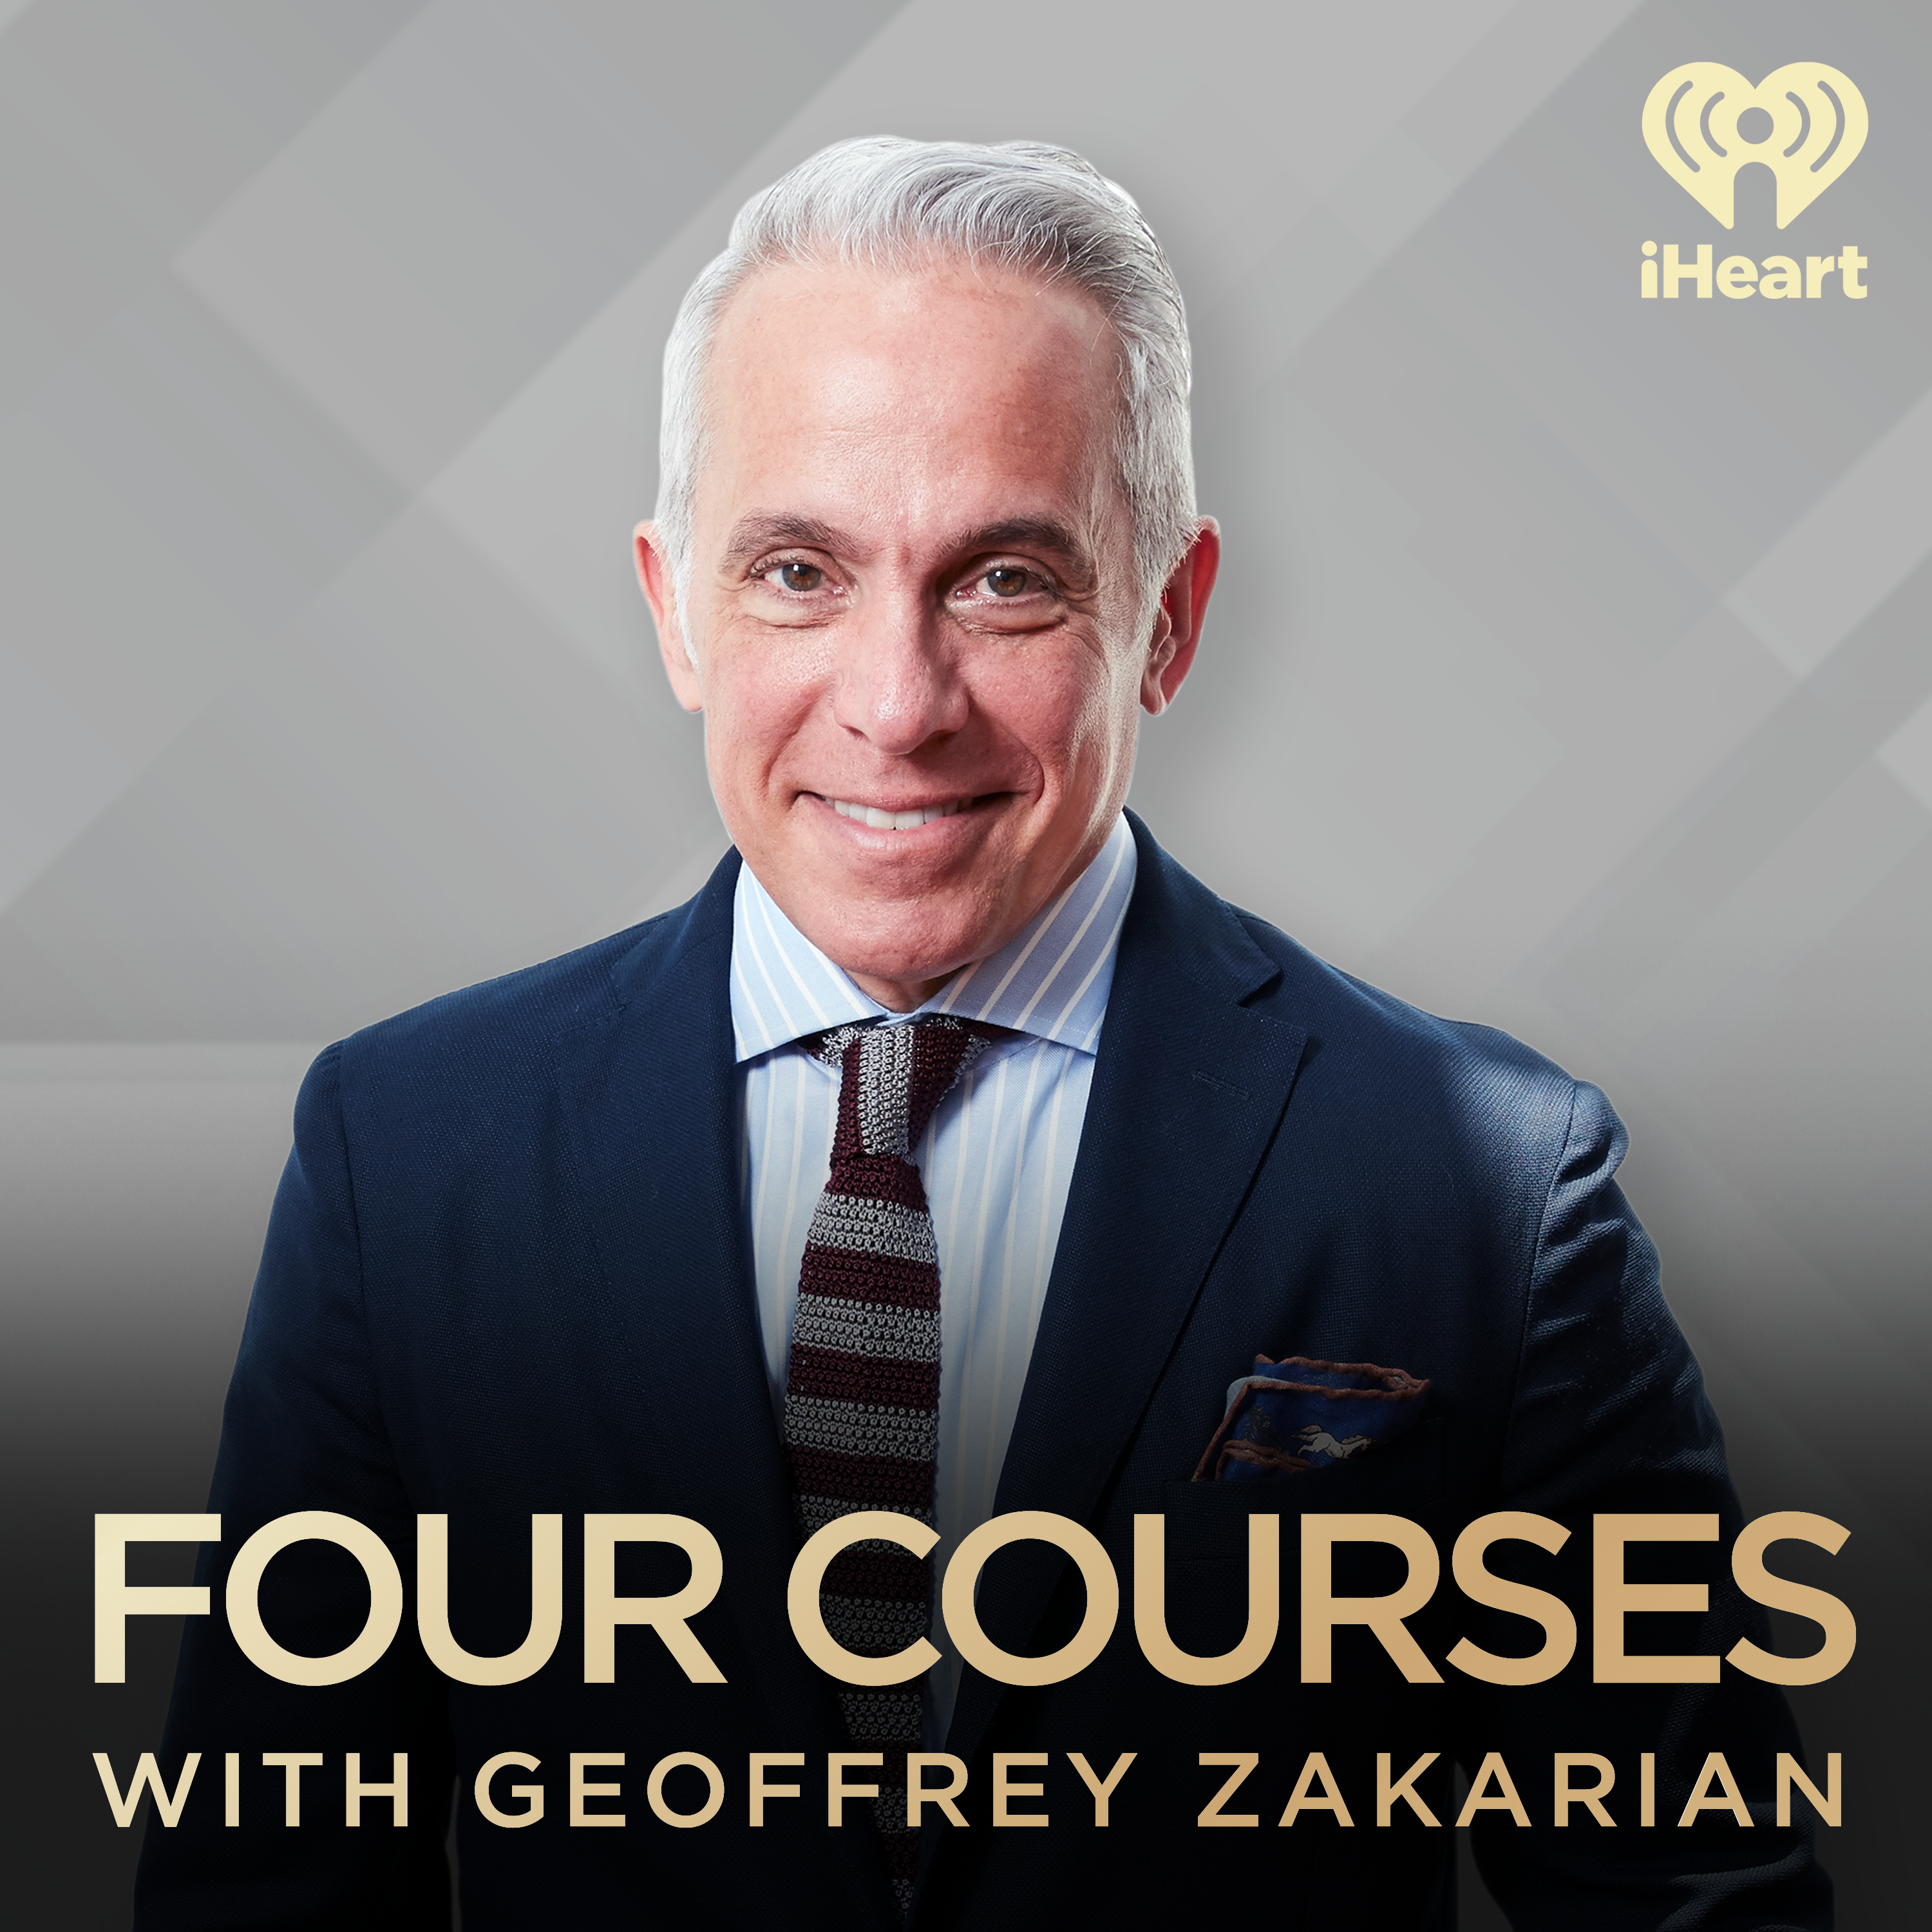 Turning the Table - Geoffrey Zakarian’s Early Life Influences (Part 1/3)